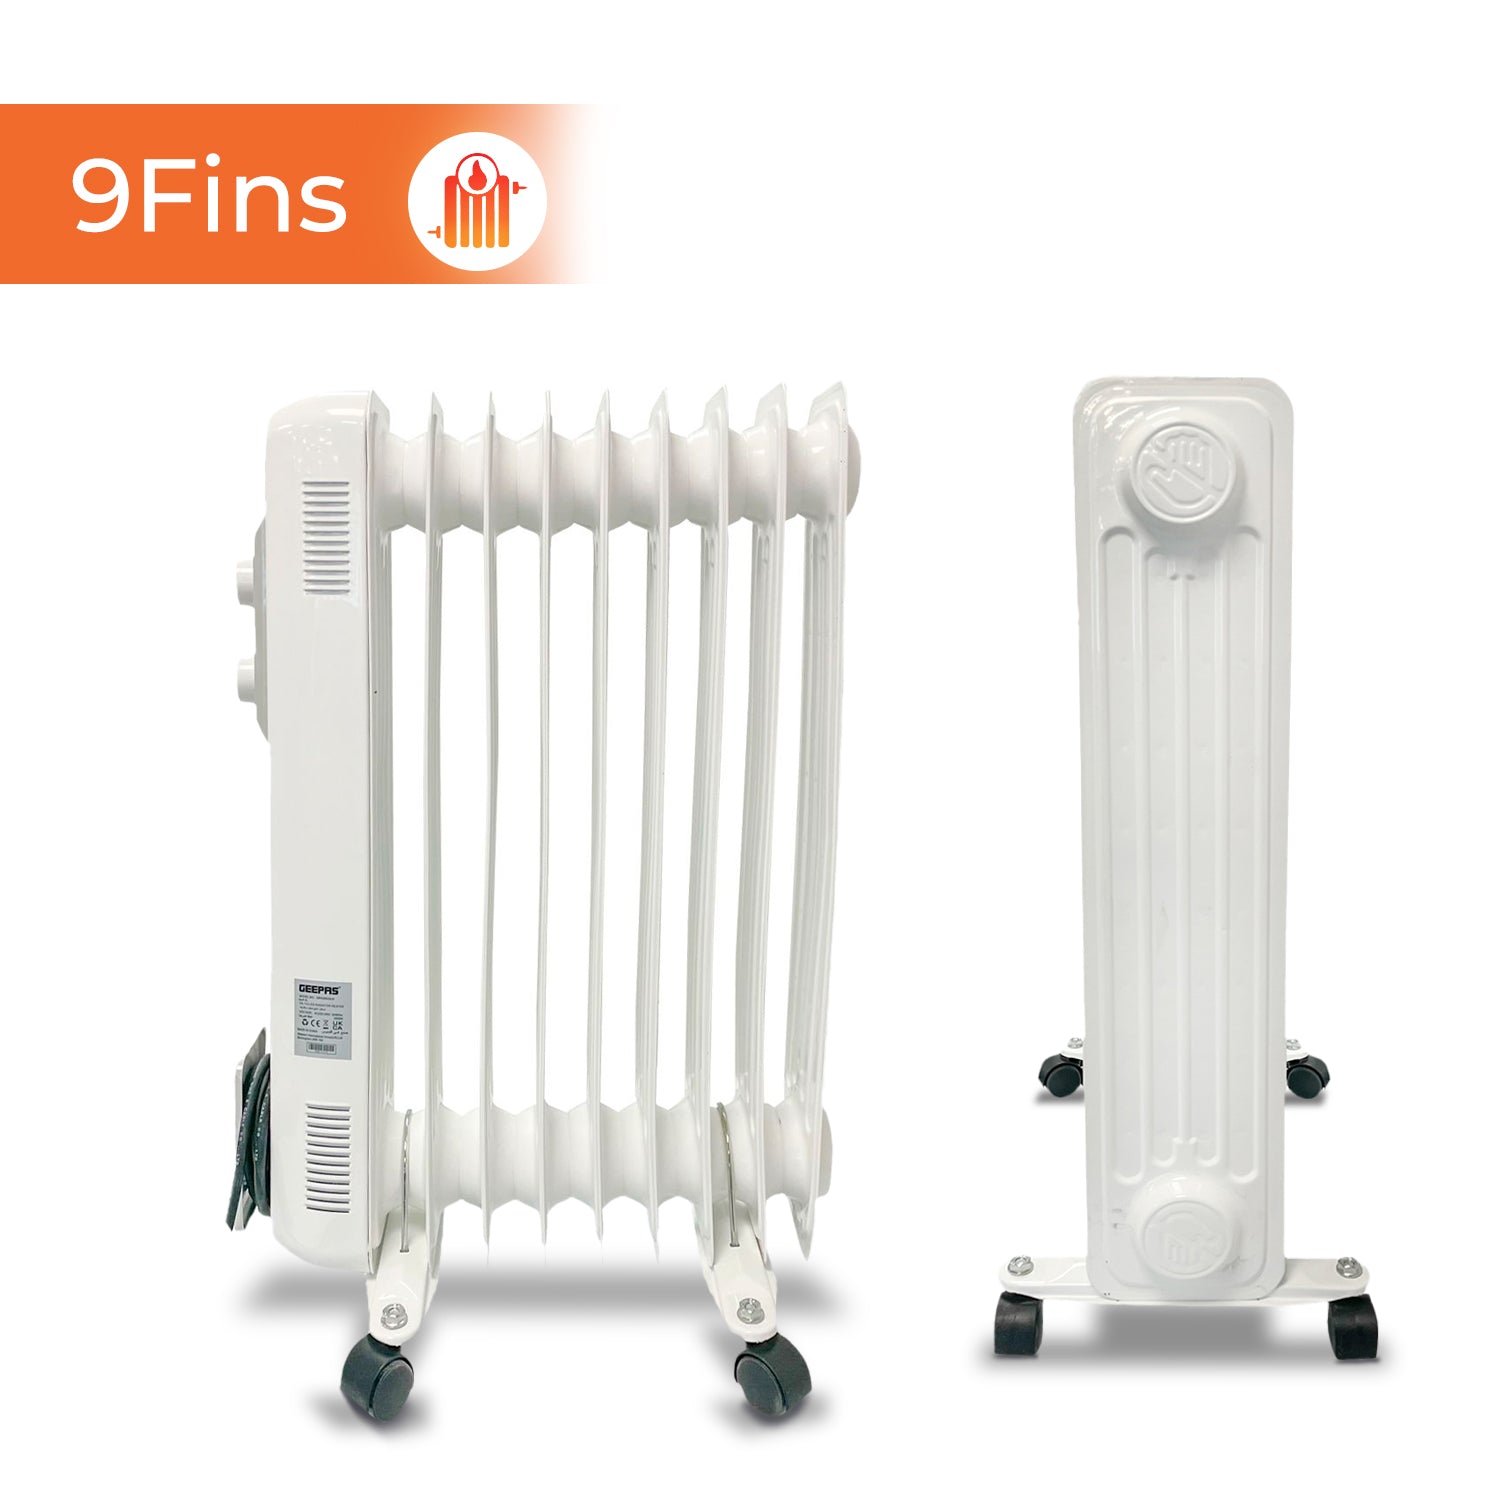 Geepas | For you. For life. Oil Filled Radiator Heater, 2000W Heaters